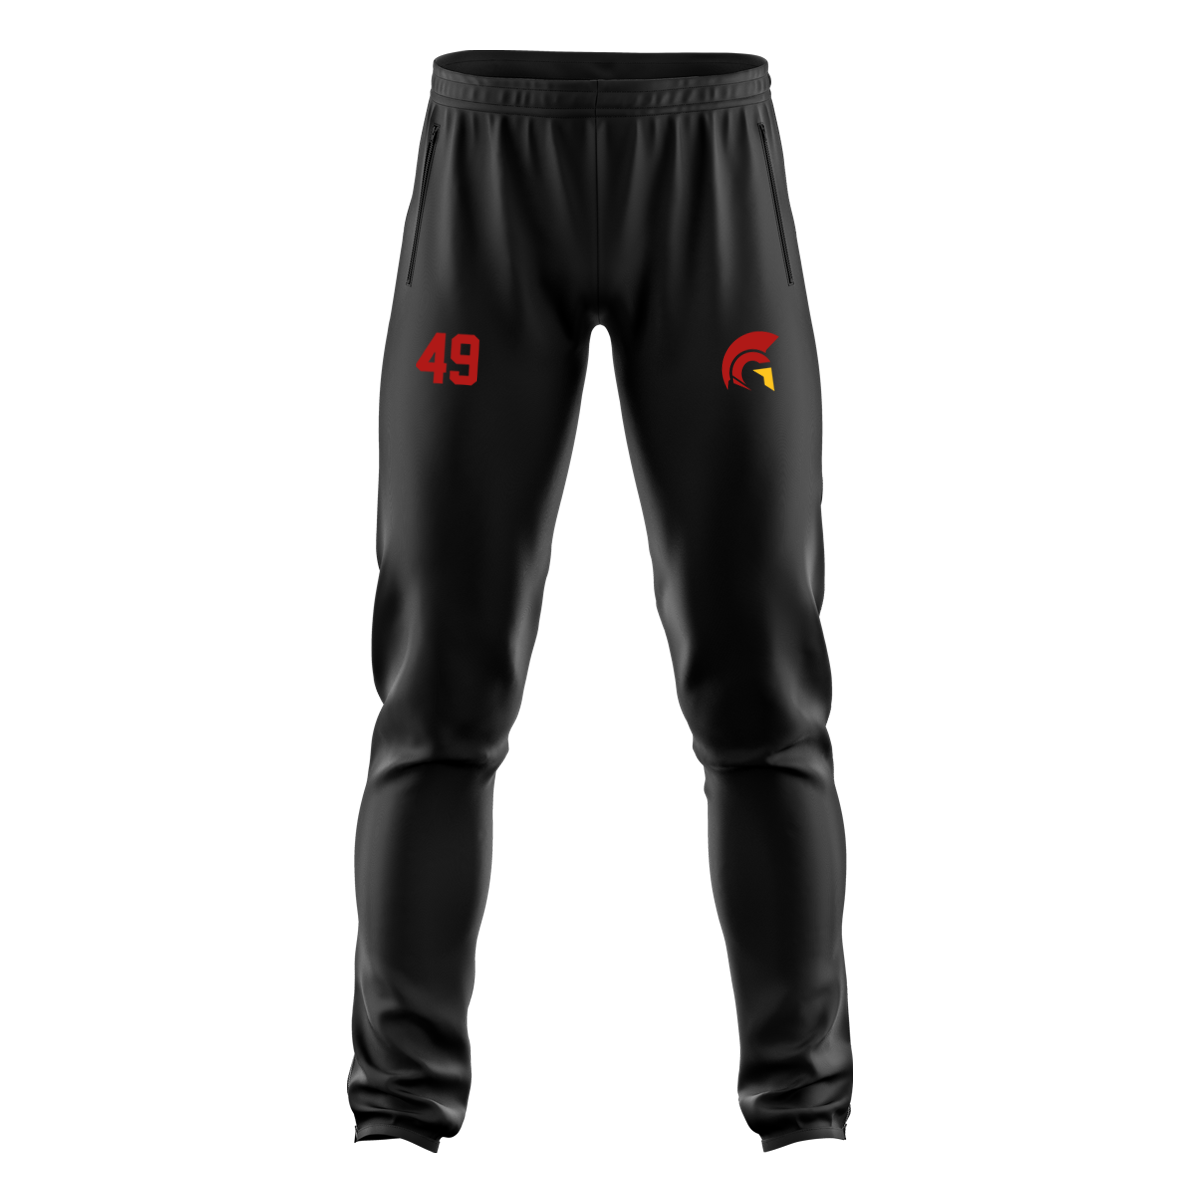 Gladiators Leisure Pant with Playernumber/Initials